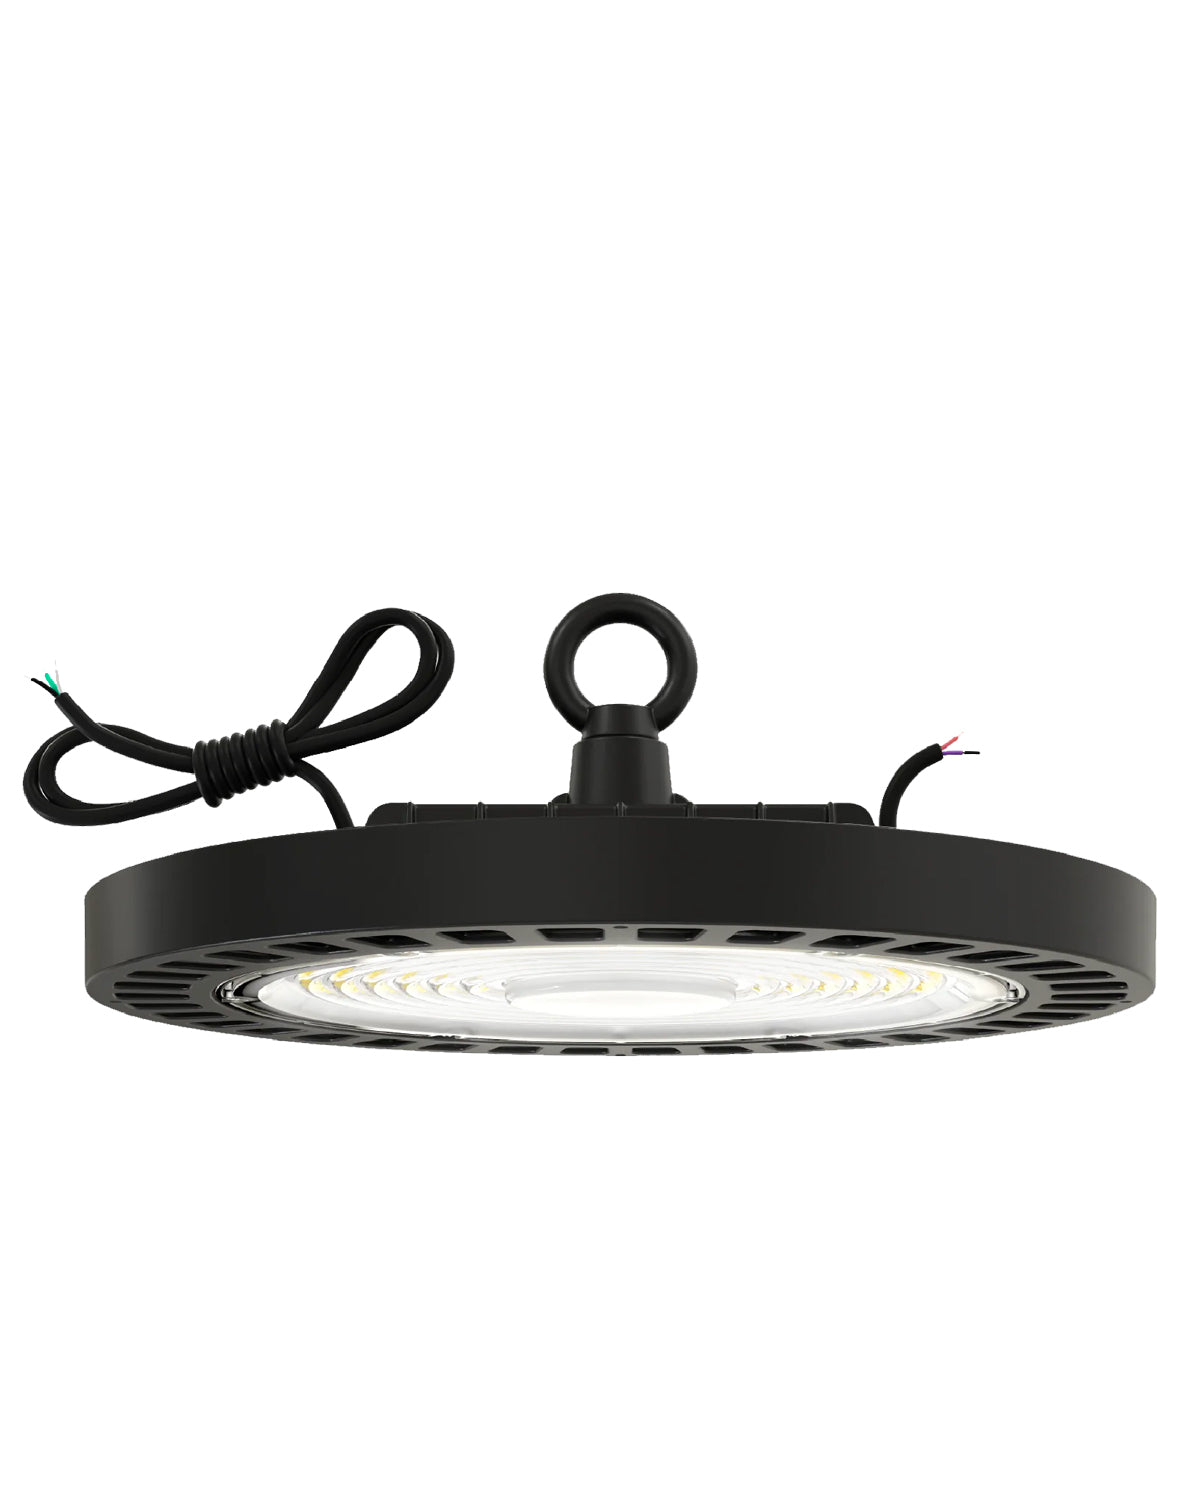 UFO LED High Bay Light 80/100/150W - 3000K/4000/5000K Tunable, 24000Lm, IP65 Waterproof, 0-10V Dimmable, Ideal for High Ceiling Areas: Commercial Shops, Workshops, Factories, Barns, and Garages Lighting Solution